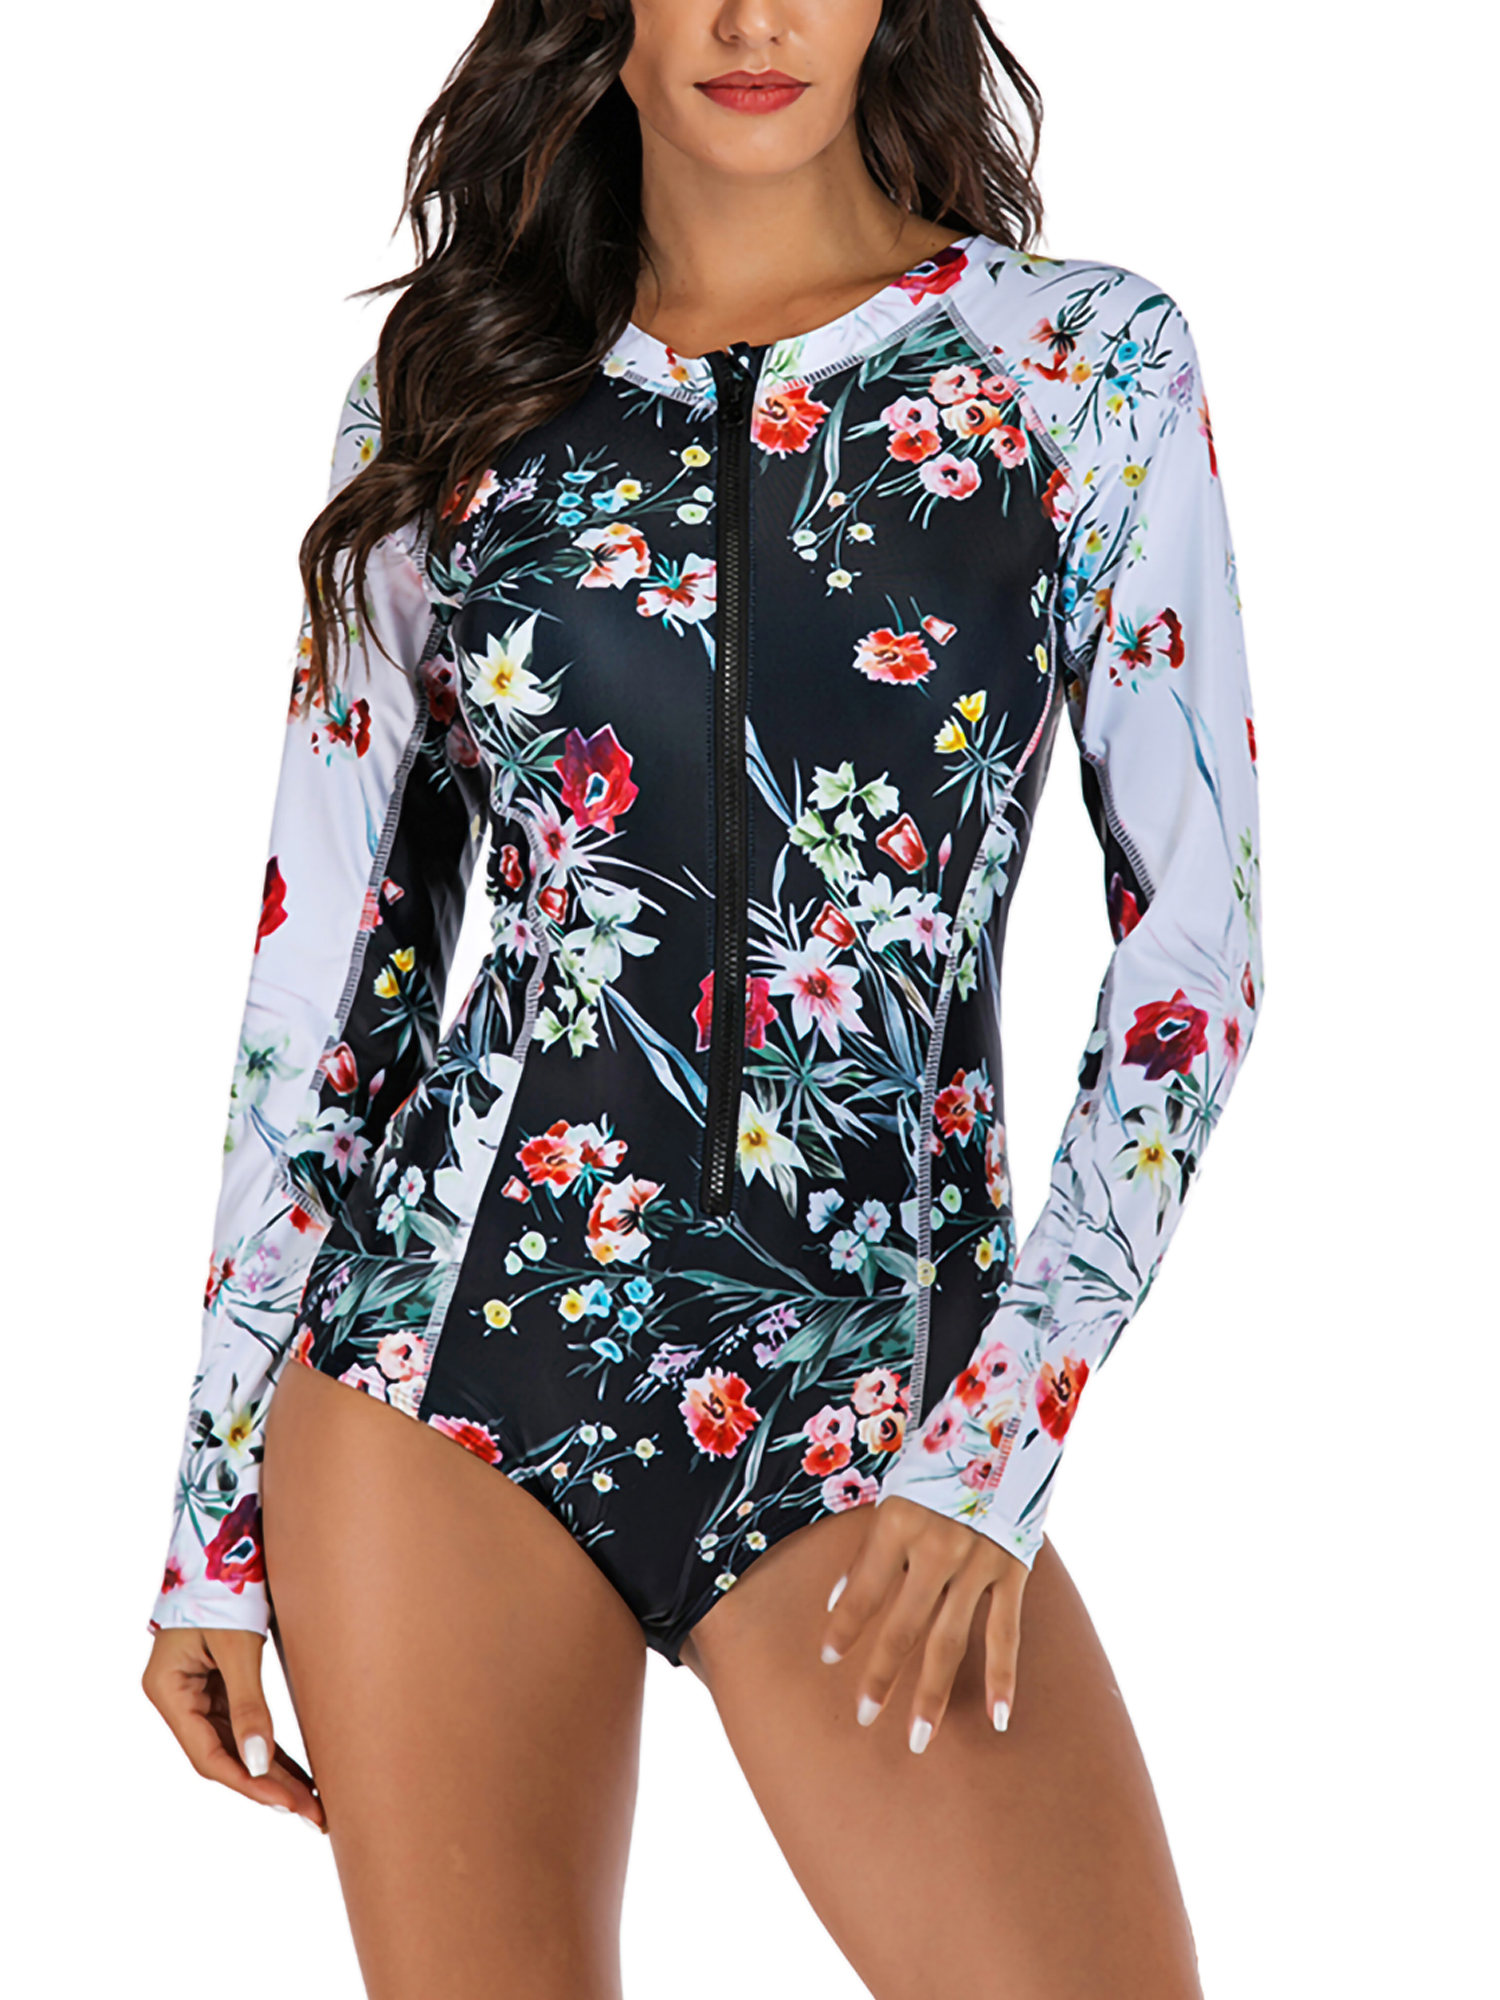 Sexy Dance Women's One Piece Swimsuit Long Sleeve Zip Floral Print Swimwear Bathing Suits for Surfing,Diving,Swimming,Rashguard - image 4 of 8